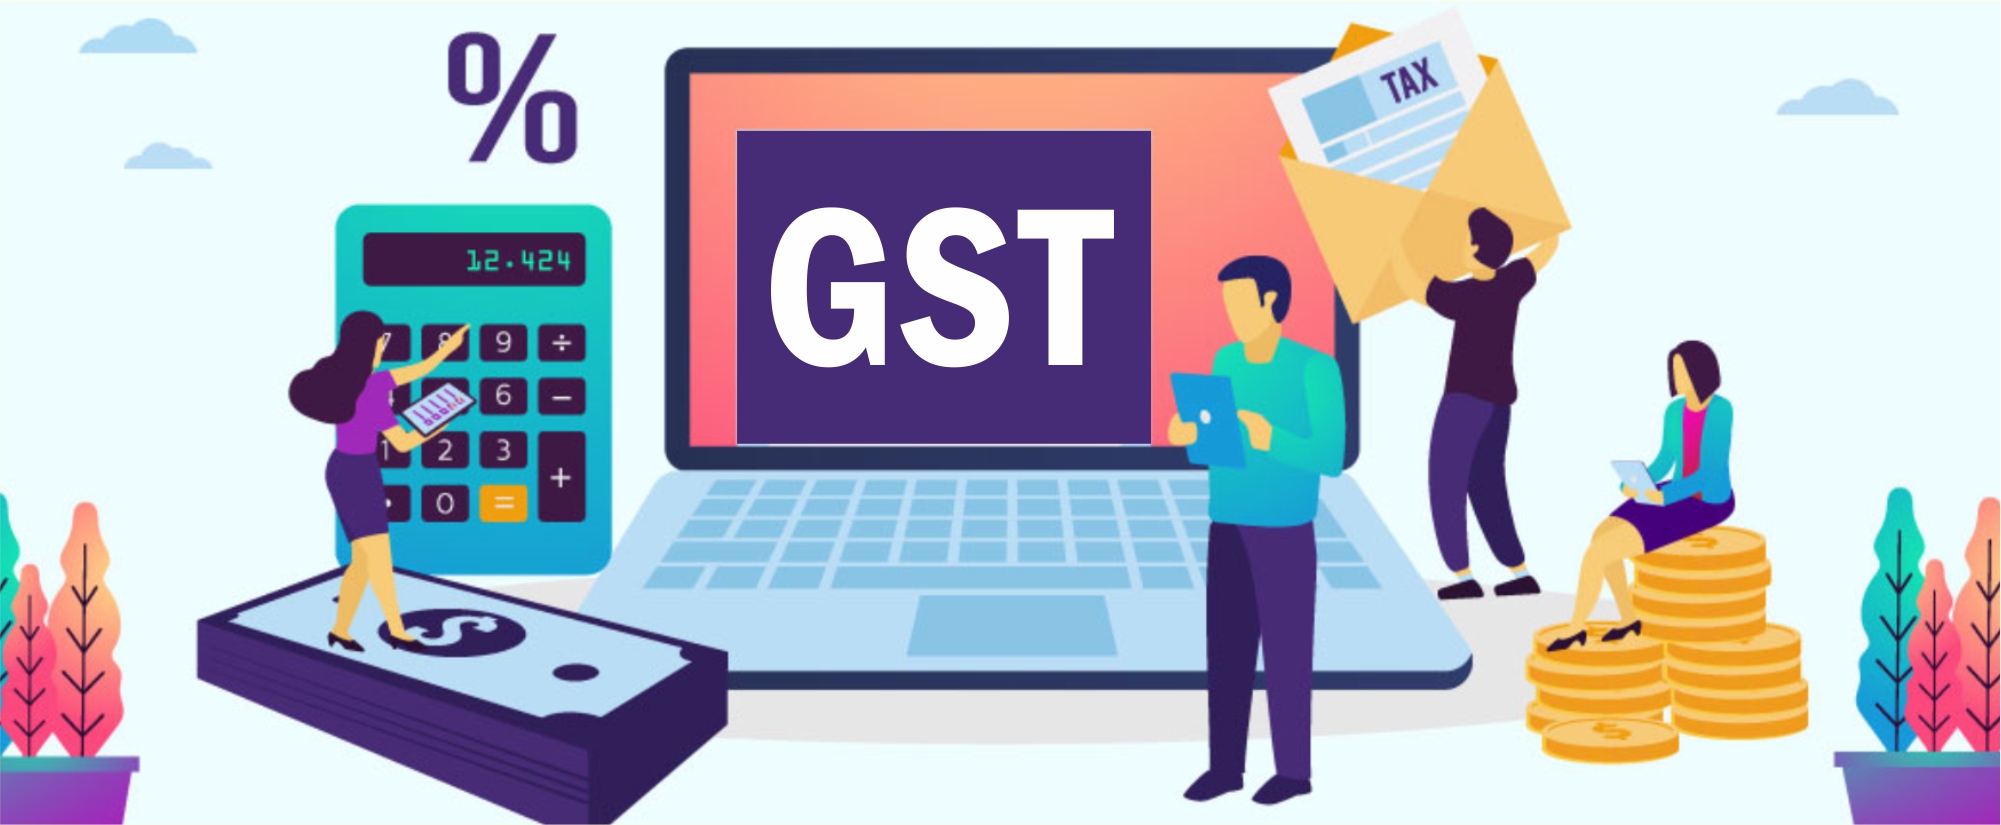 GSTN Issues Advisory On Reporting 6% Rate In GSTR-1